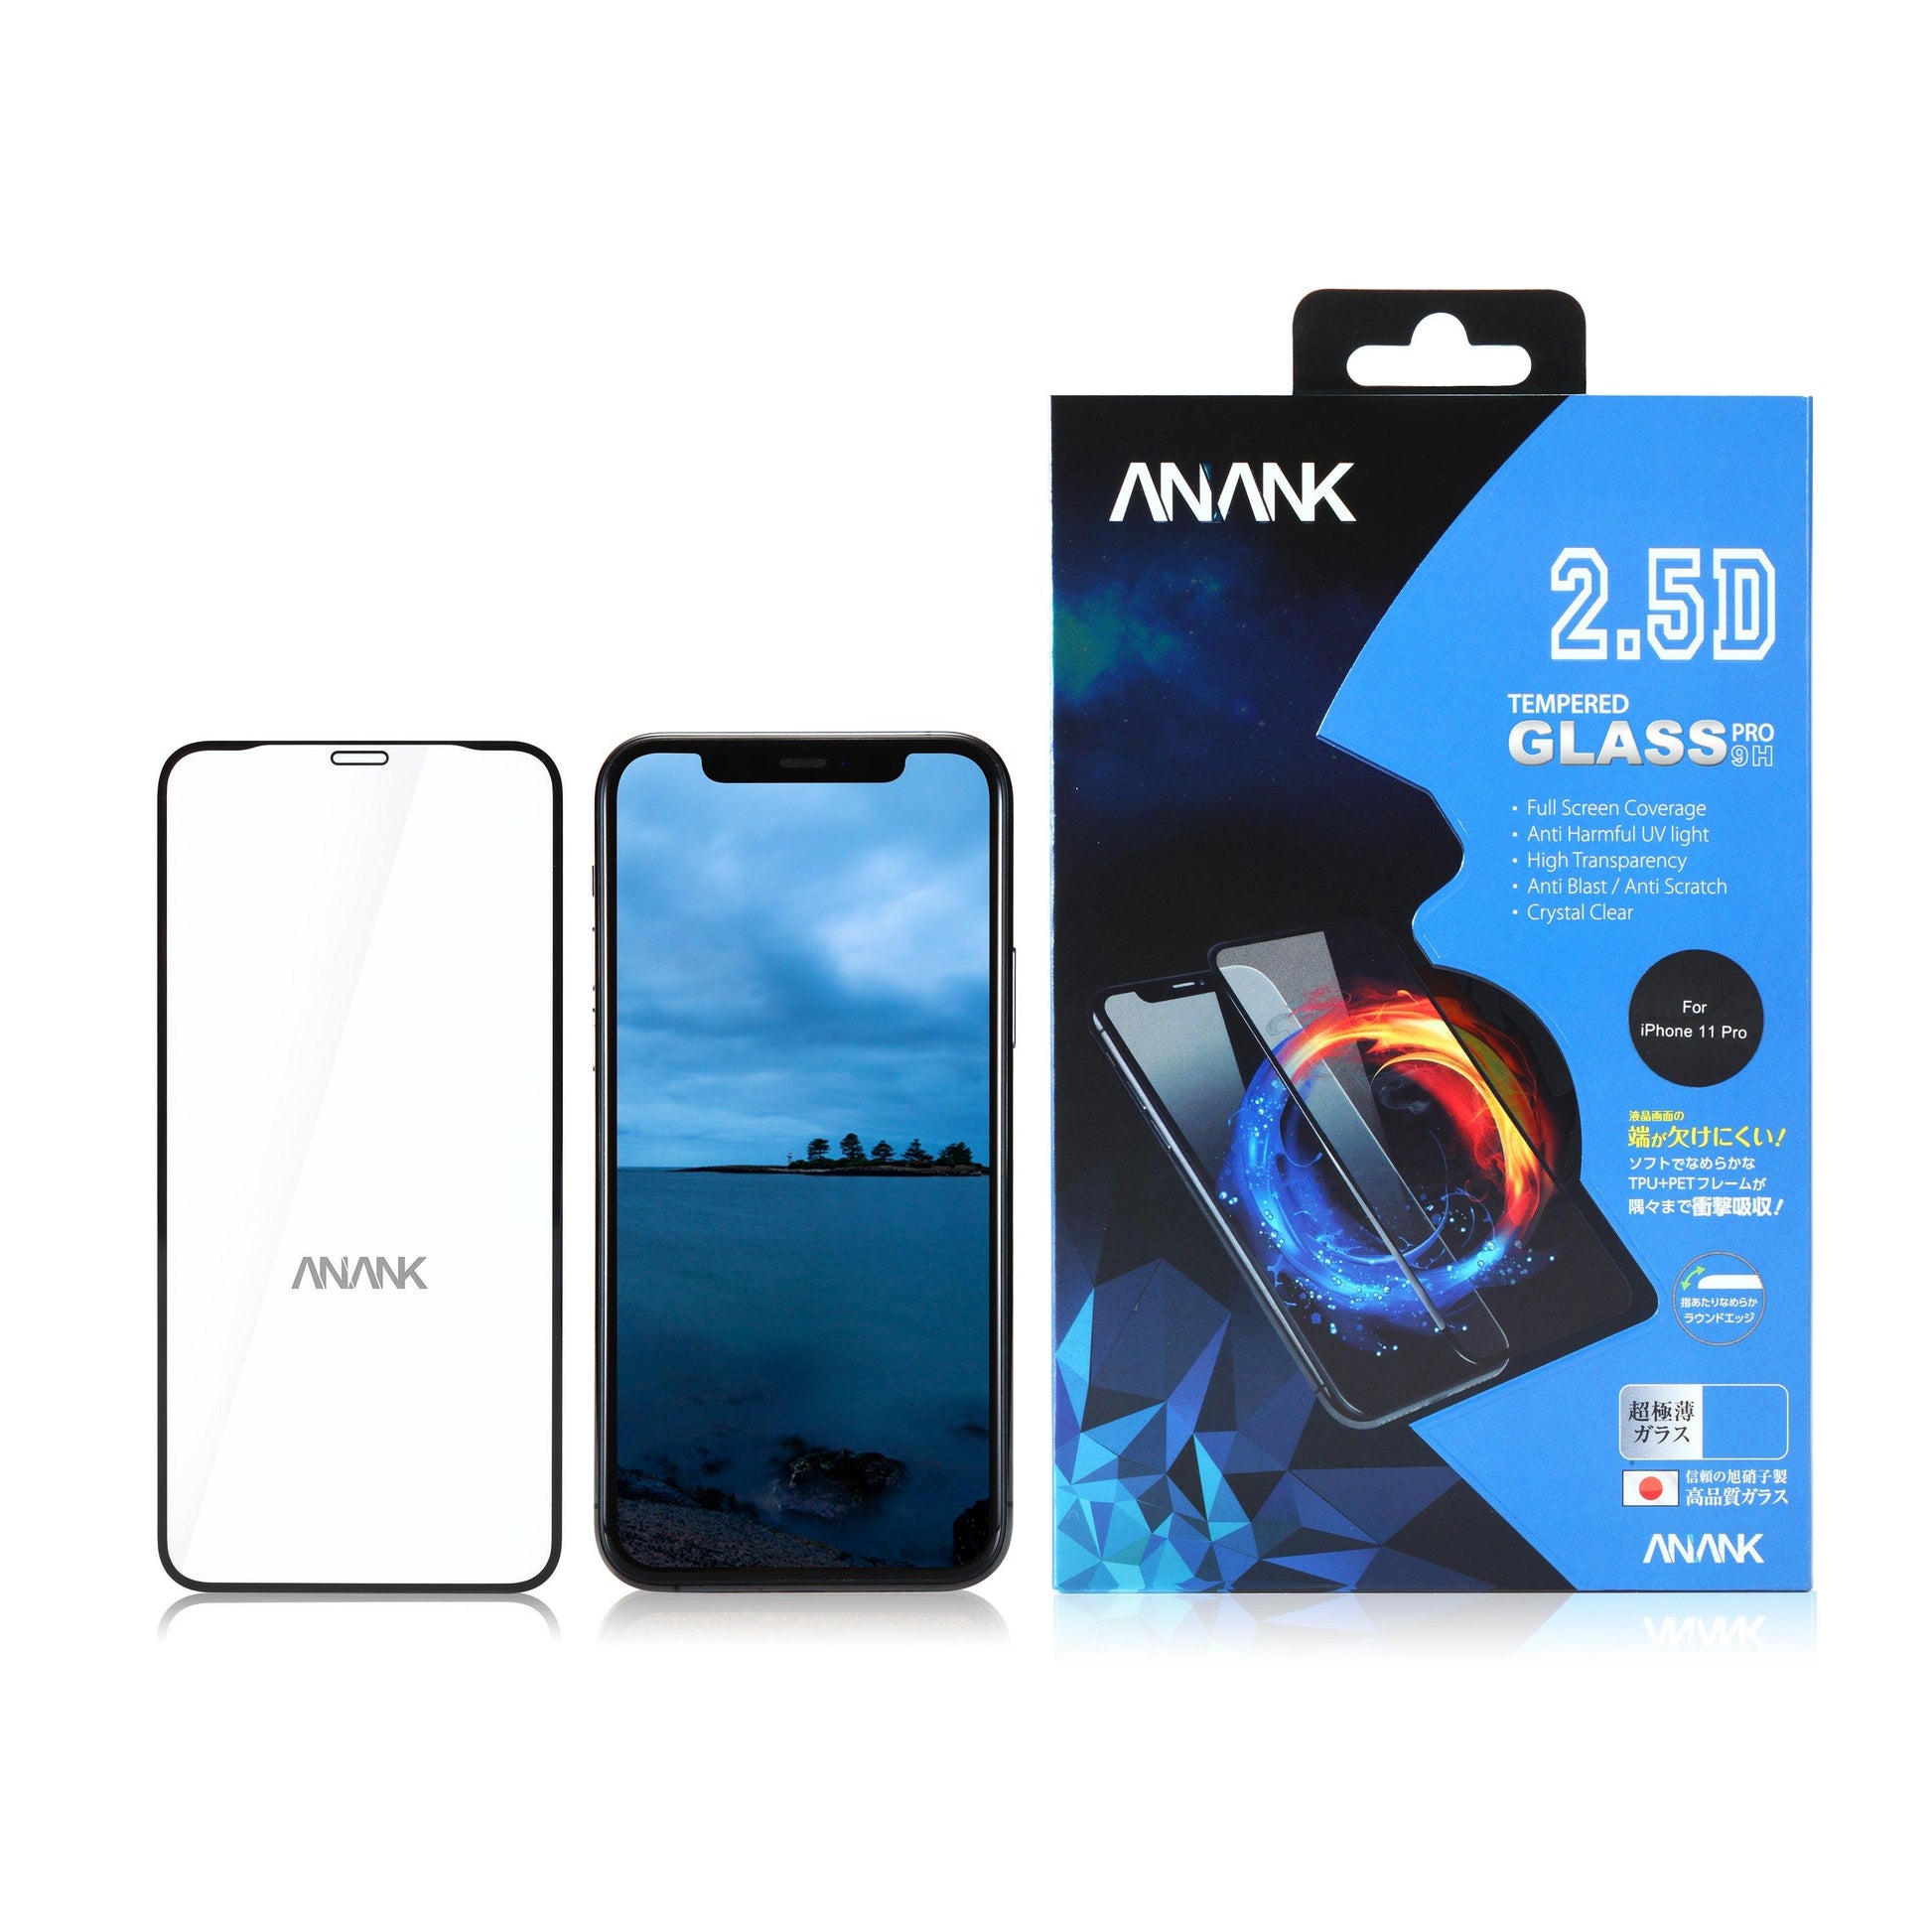 ANANK 9H Hardness Full Coverage Tempered Glass Screen Protector Film f –  Armor King Case